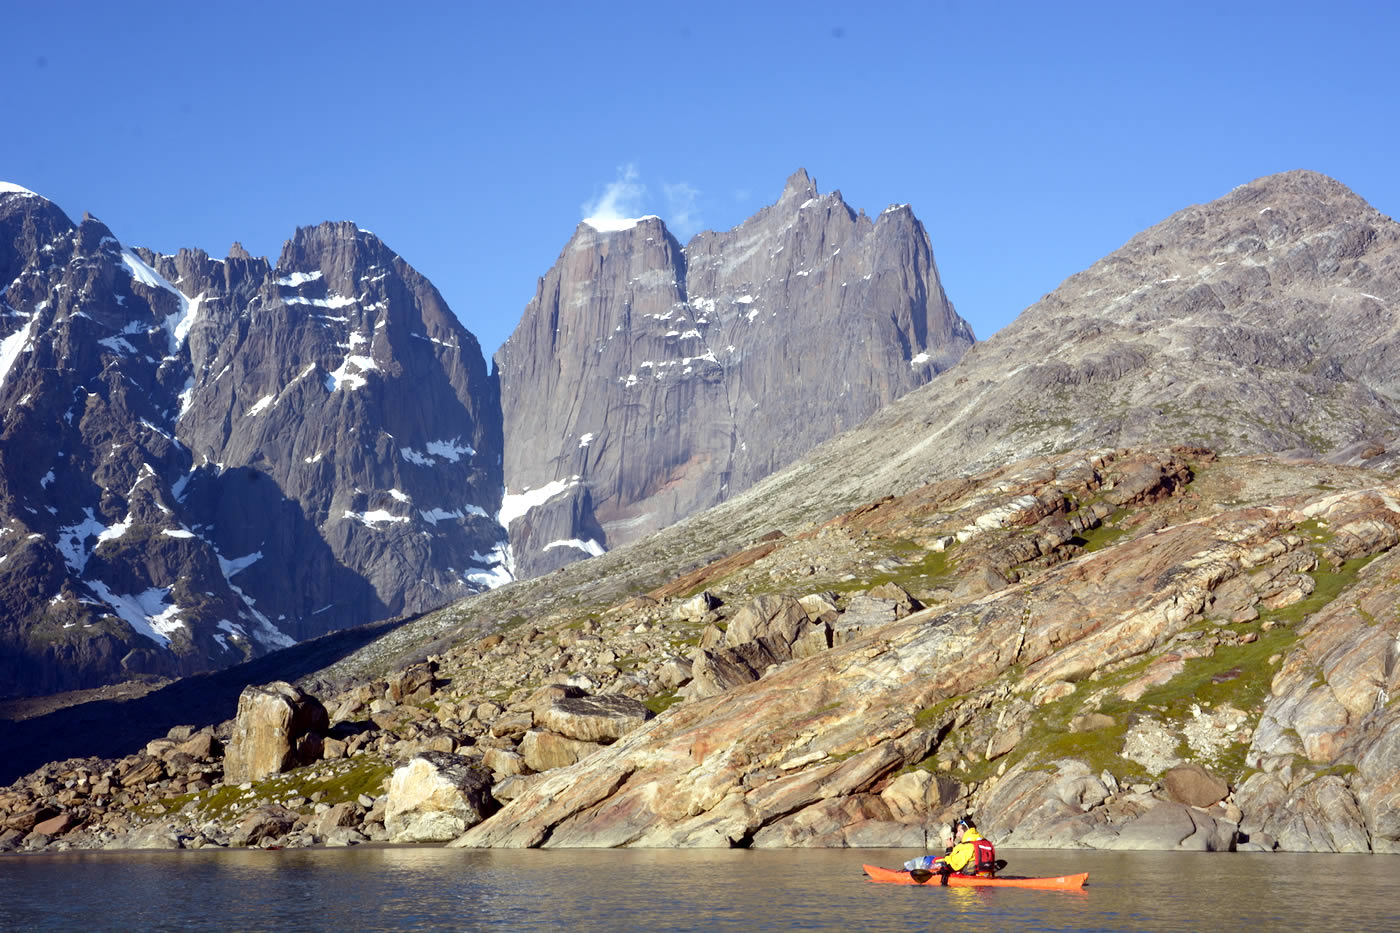 Christian Laddy Ledergerber arriving after seven days of intense paddling. Basecamp was at the foot of the big boulder. The Apostelens Tommelfinger and its 2000-meter west face looms in the background. [Photo] Silvan Schuepbach Ledergerber paddle in the North Atlantic Ocean. [Photo] Silvan Schuepbach